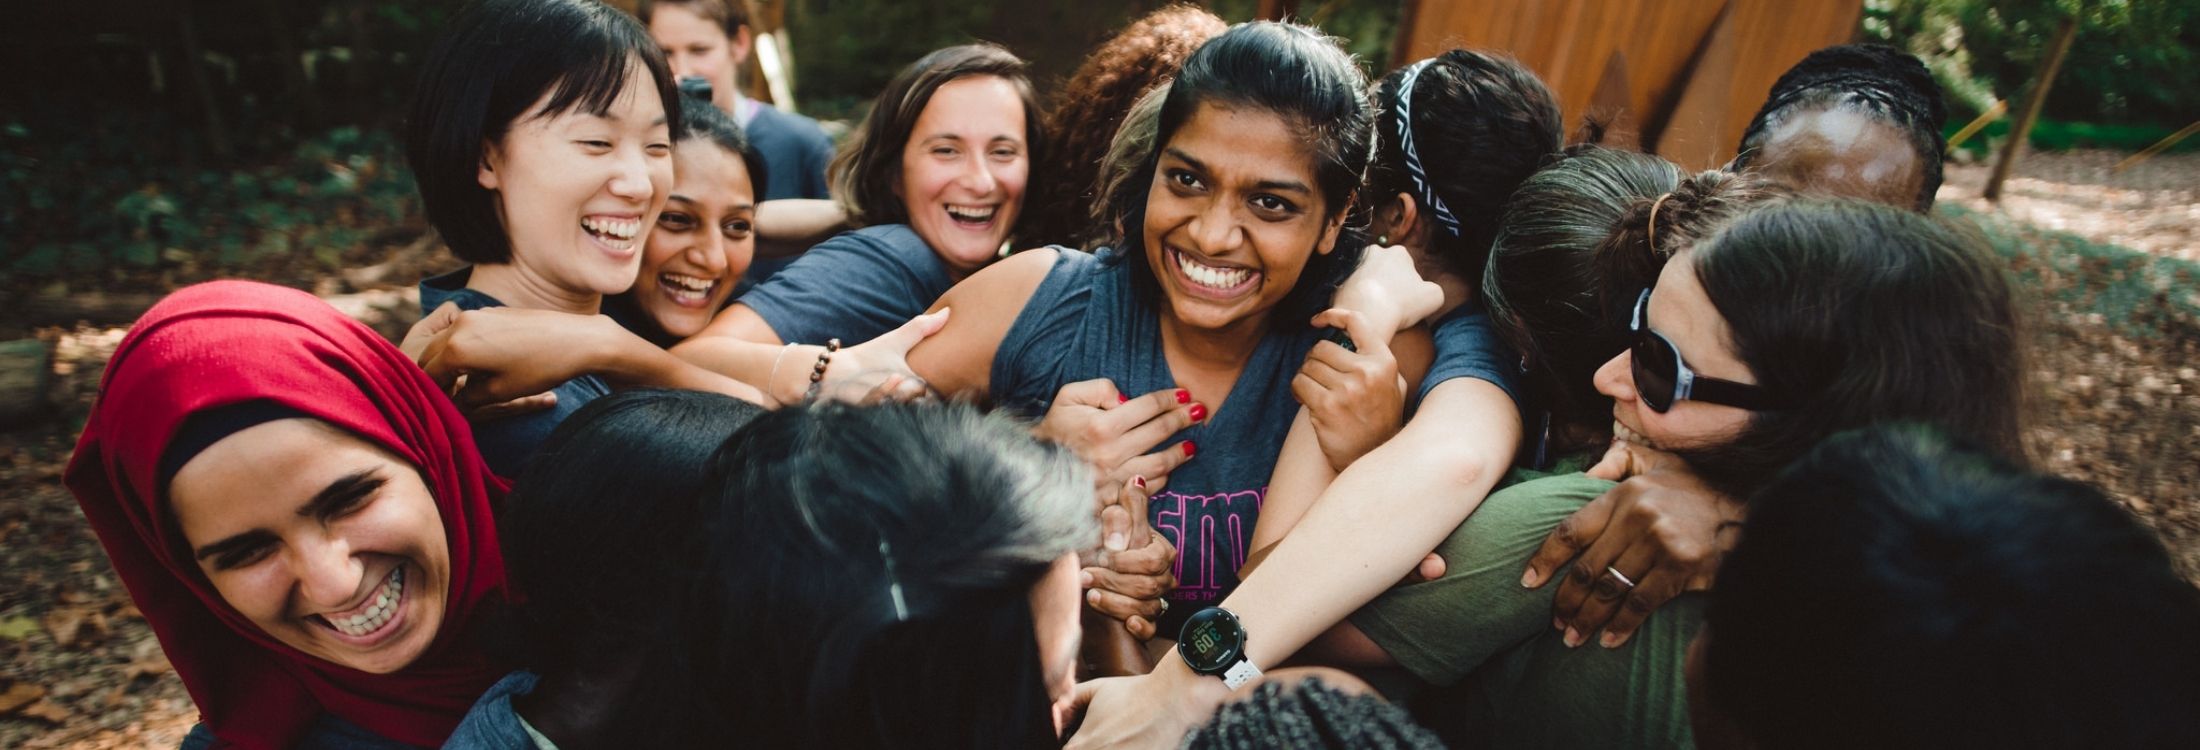 Sangeetha Manoharan from India, a participant in the 2017 Global Sports Mentoring Empowering Women program, stands grinning in the middle of a huddle of all program participants as they navigate a ropes course challenge at Terrapin Adventures.